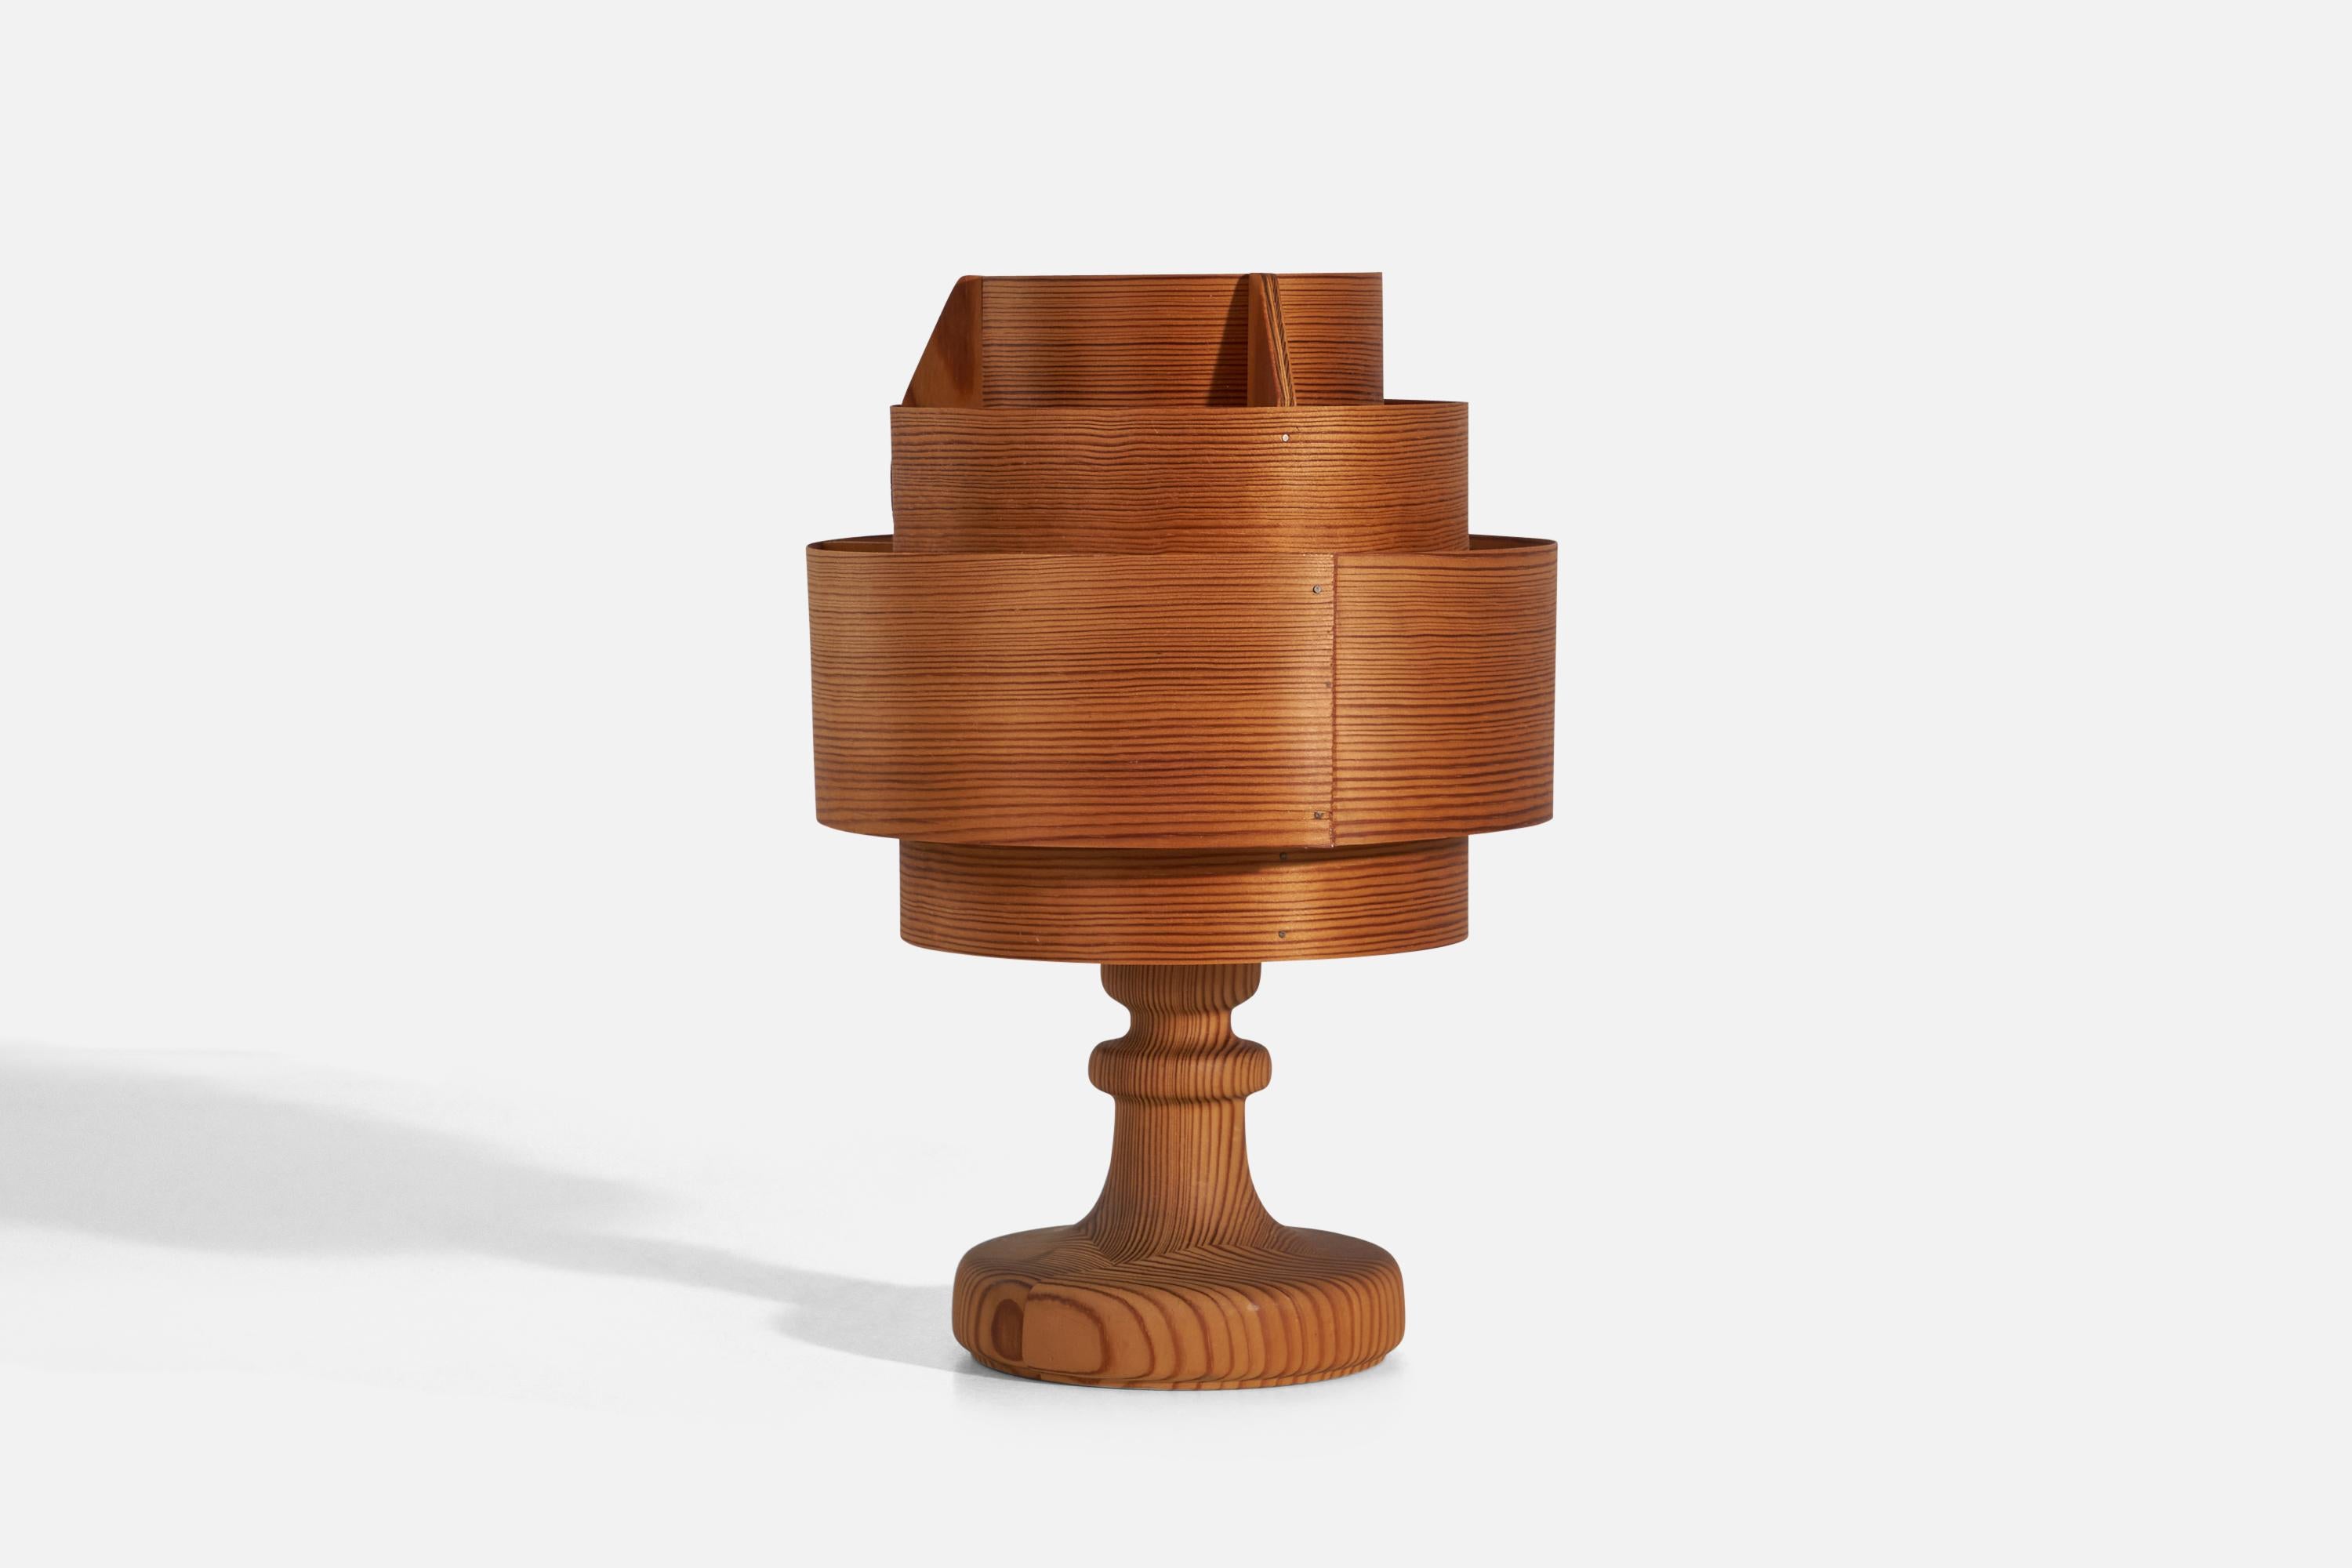 A pine and moulded pine veneer table lamp designed and produced by Hans-Agne Jakobsson, Sweden, 1970s.

Socket takes standard E-26 medium base bulb.

There is no maximum wattage stated on the fixture.

